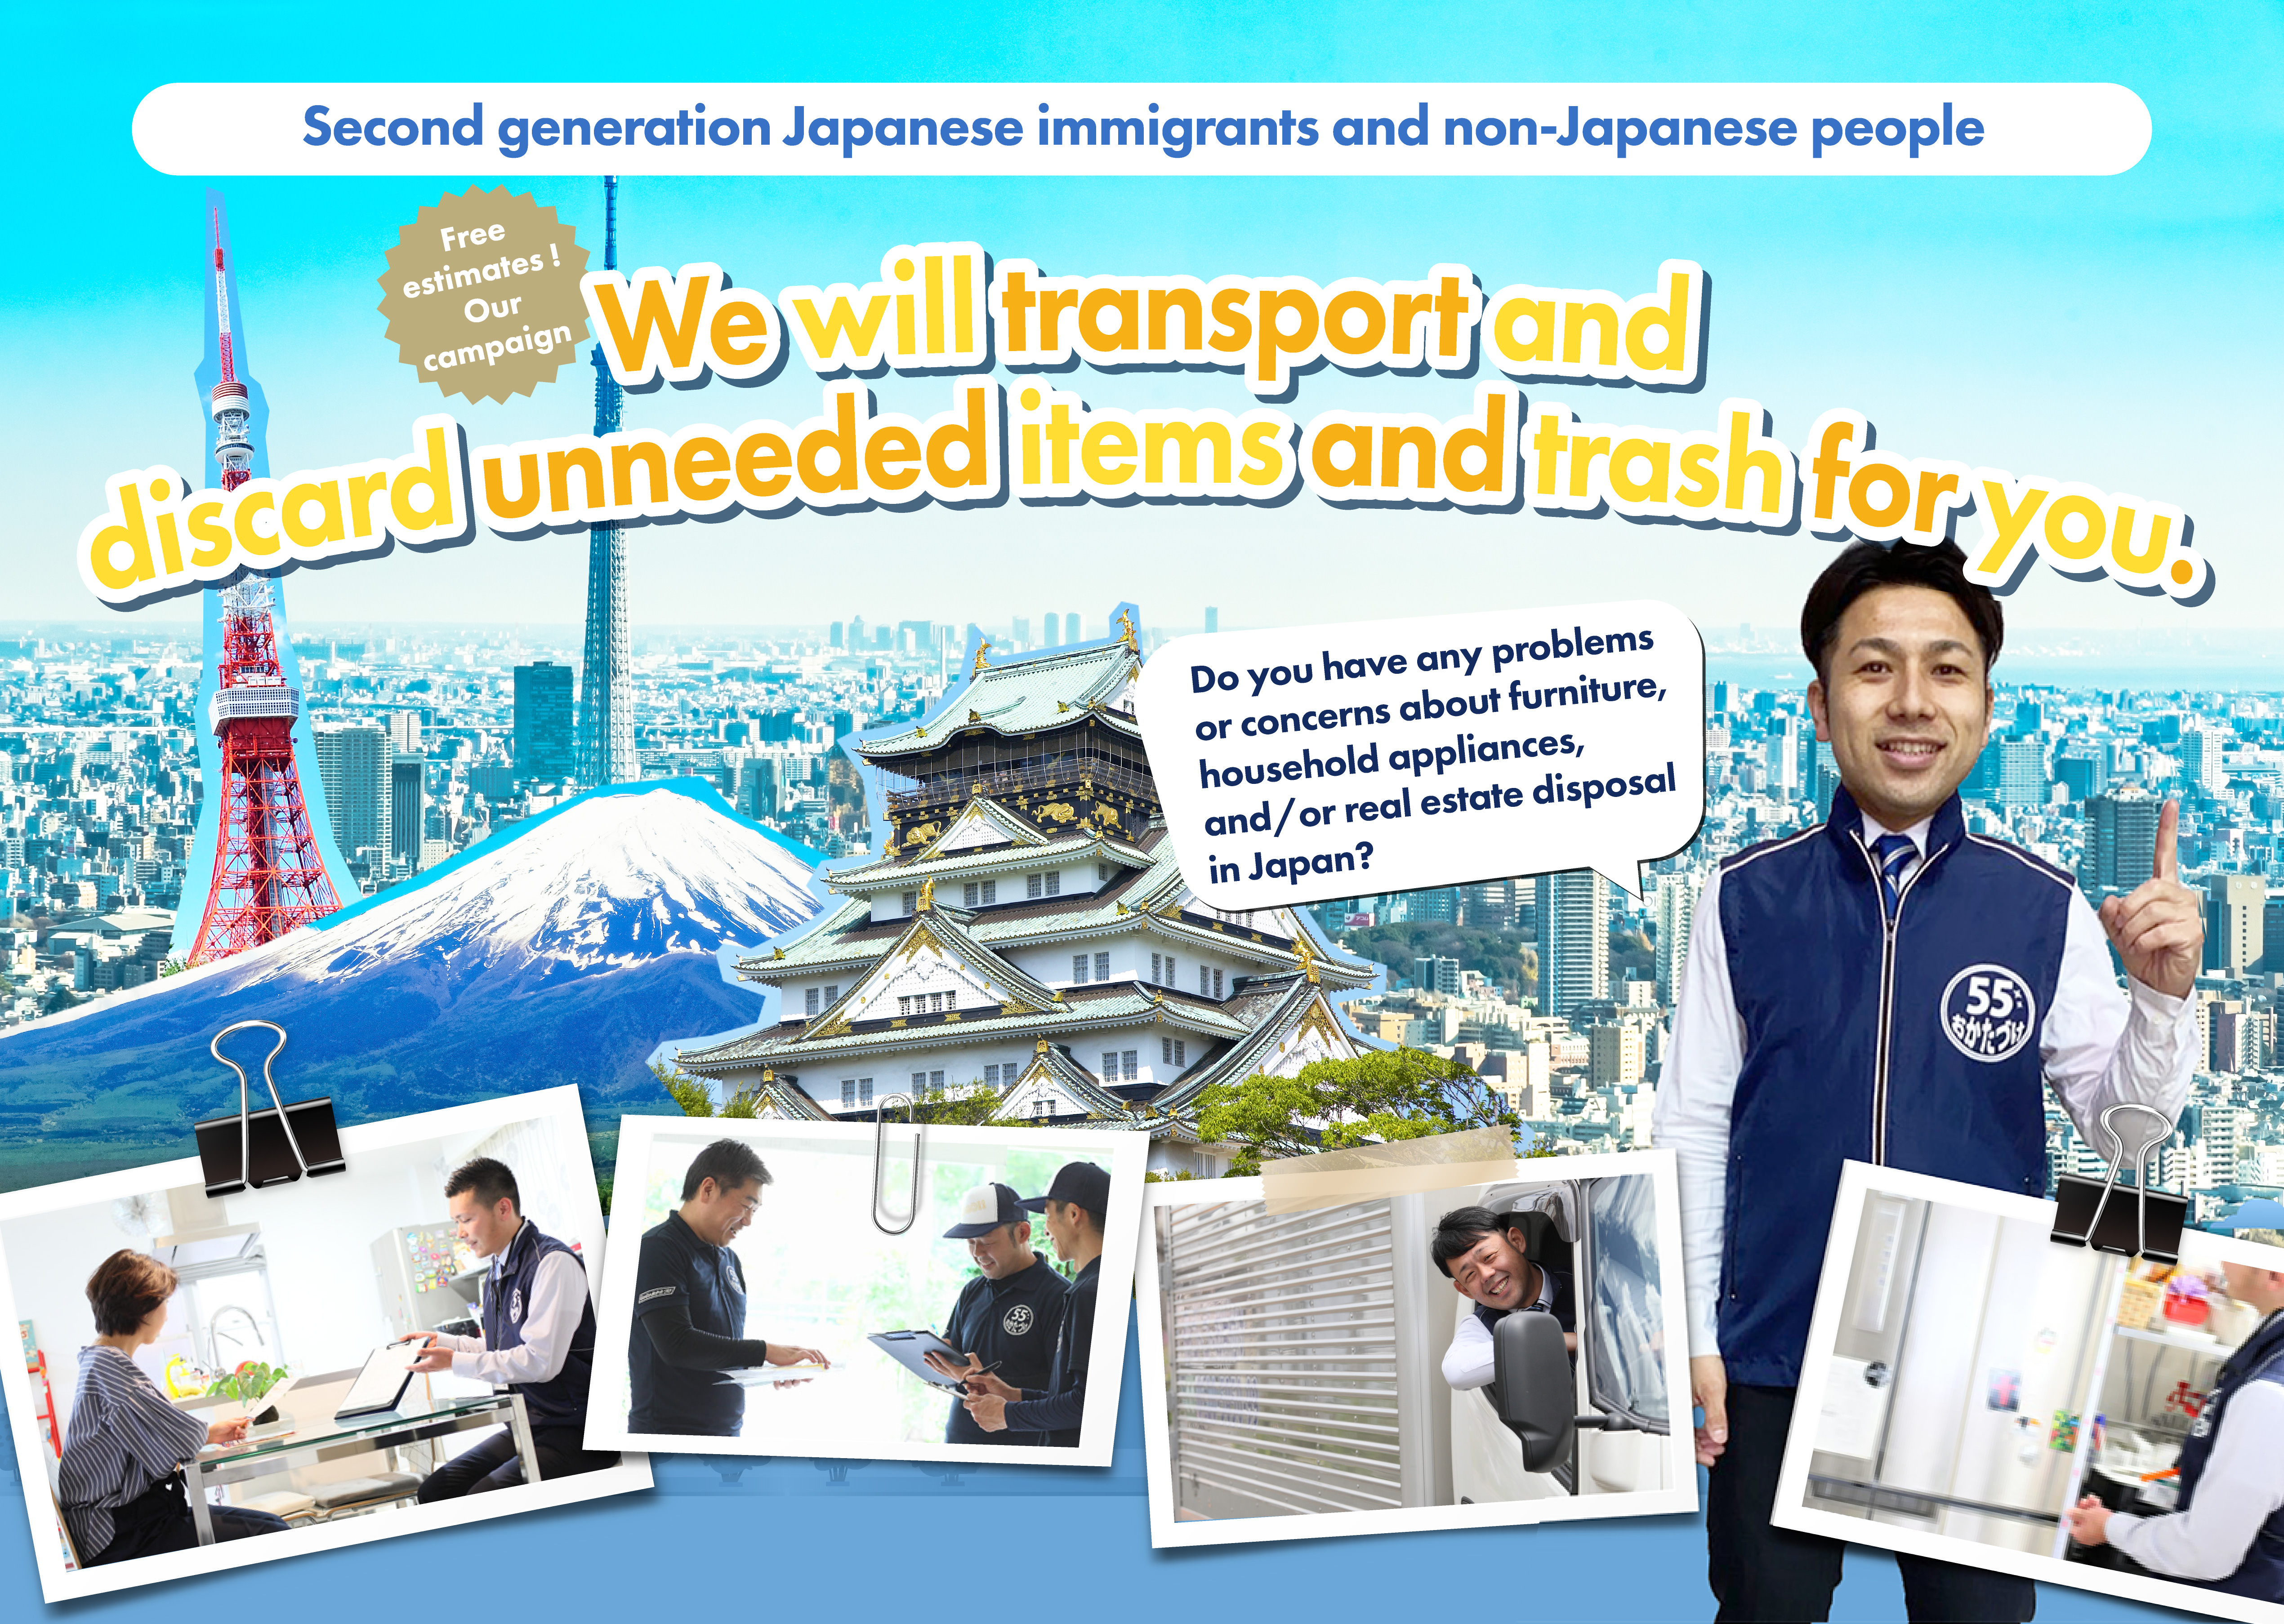 Second generation Japanese immigrants and non-Japanese people: Fee estimates! Our campaign / We will transport and discard unneeded items and trash for you. Do you have any problems or concerns about furniture, household appliances, and / or real estate disposal in Japan?